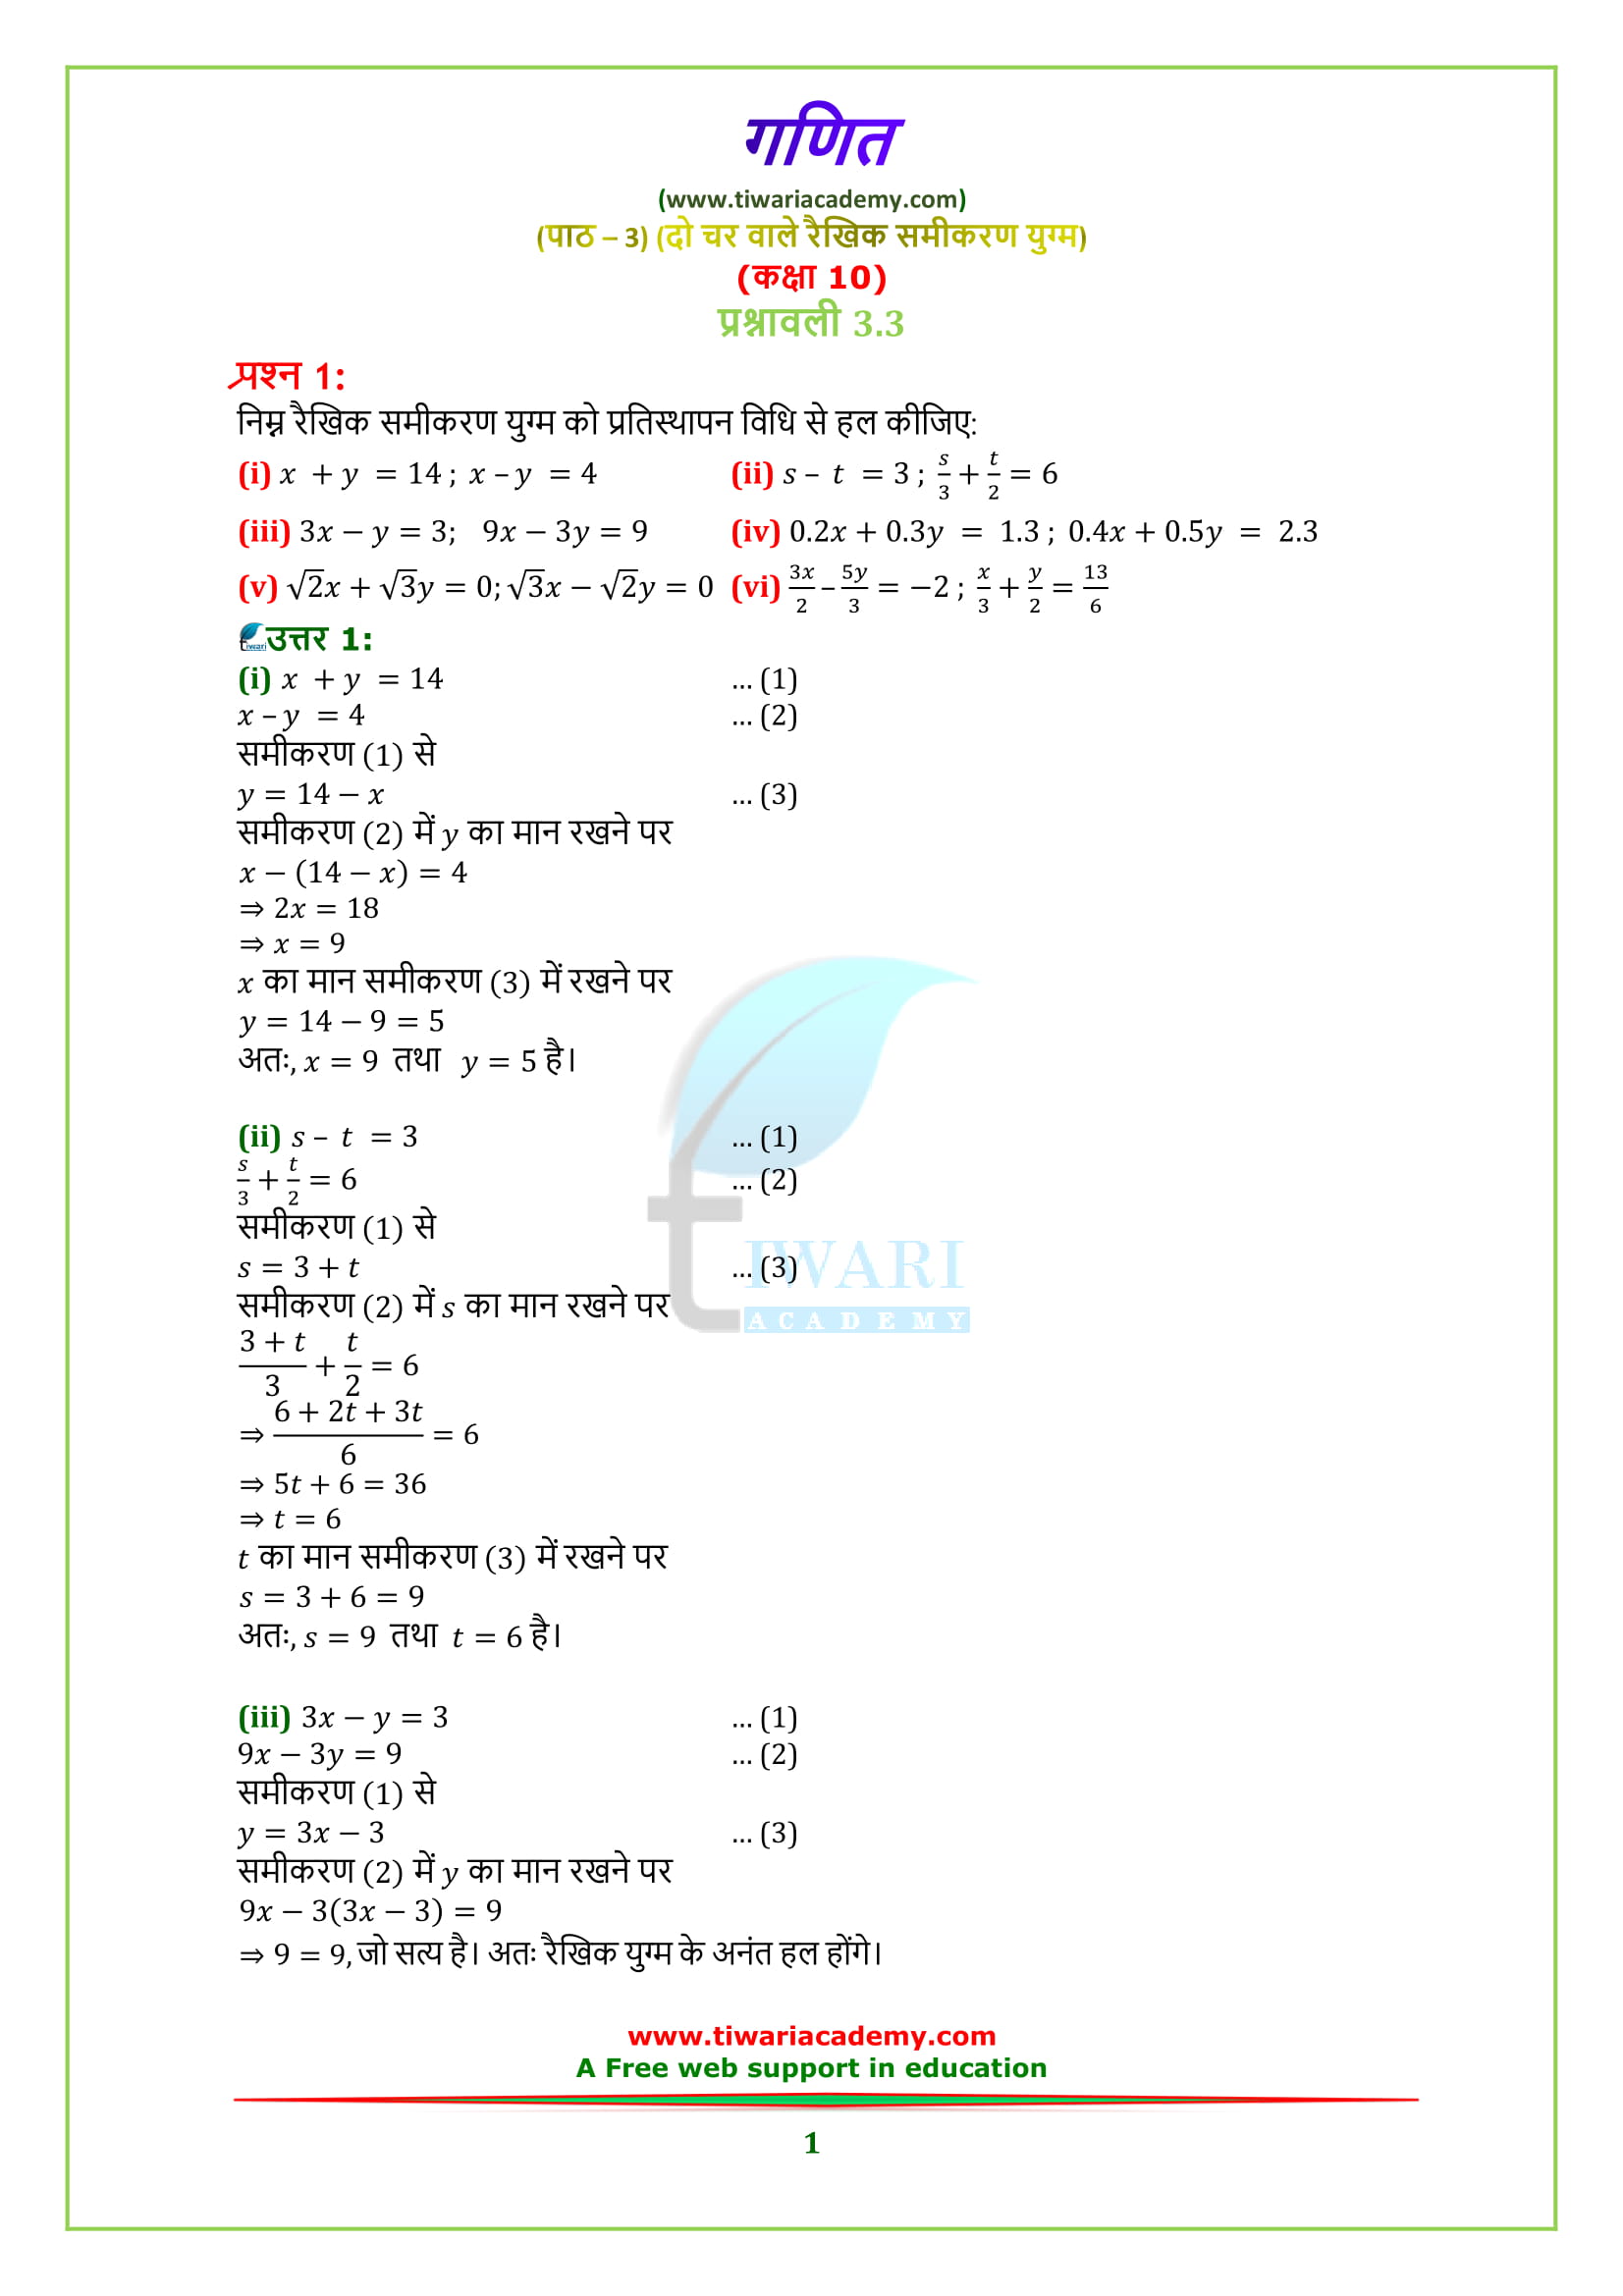 Class 10 maths chapter 3 exercise 3.3 in Hindi medium